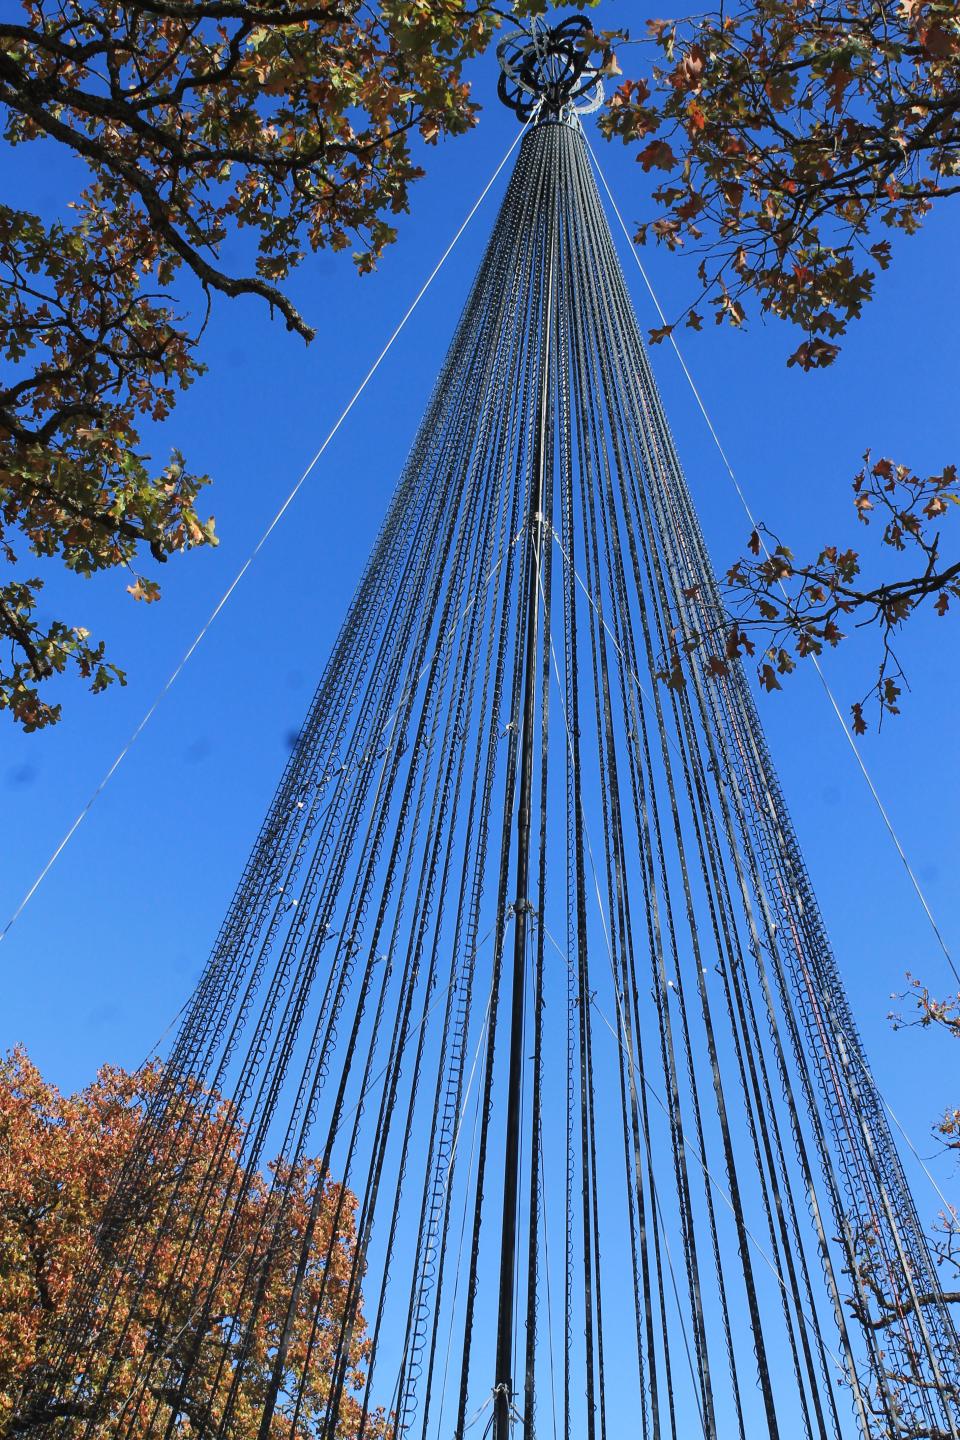 The LED Christmas tree at Creekmore Park is 50 feet tall and will light up at a 5:30 p.m. Monday, Nov. 28 ceremony for the start of "Holiday Express."